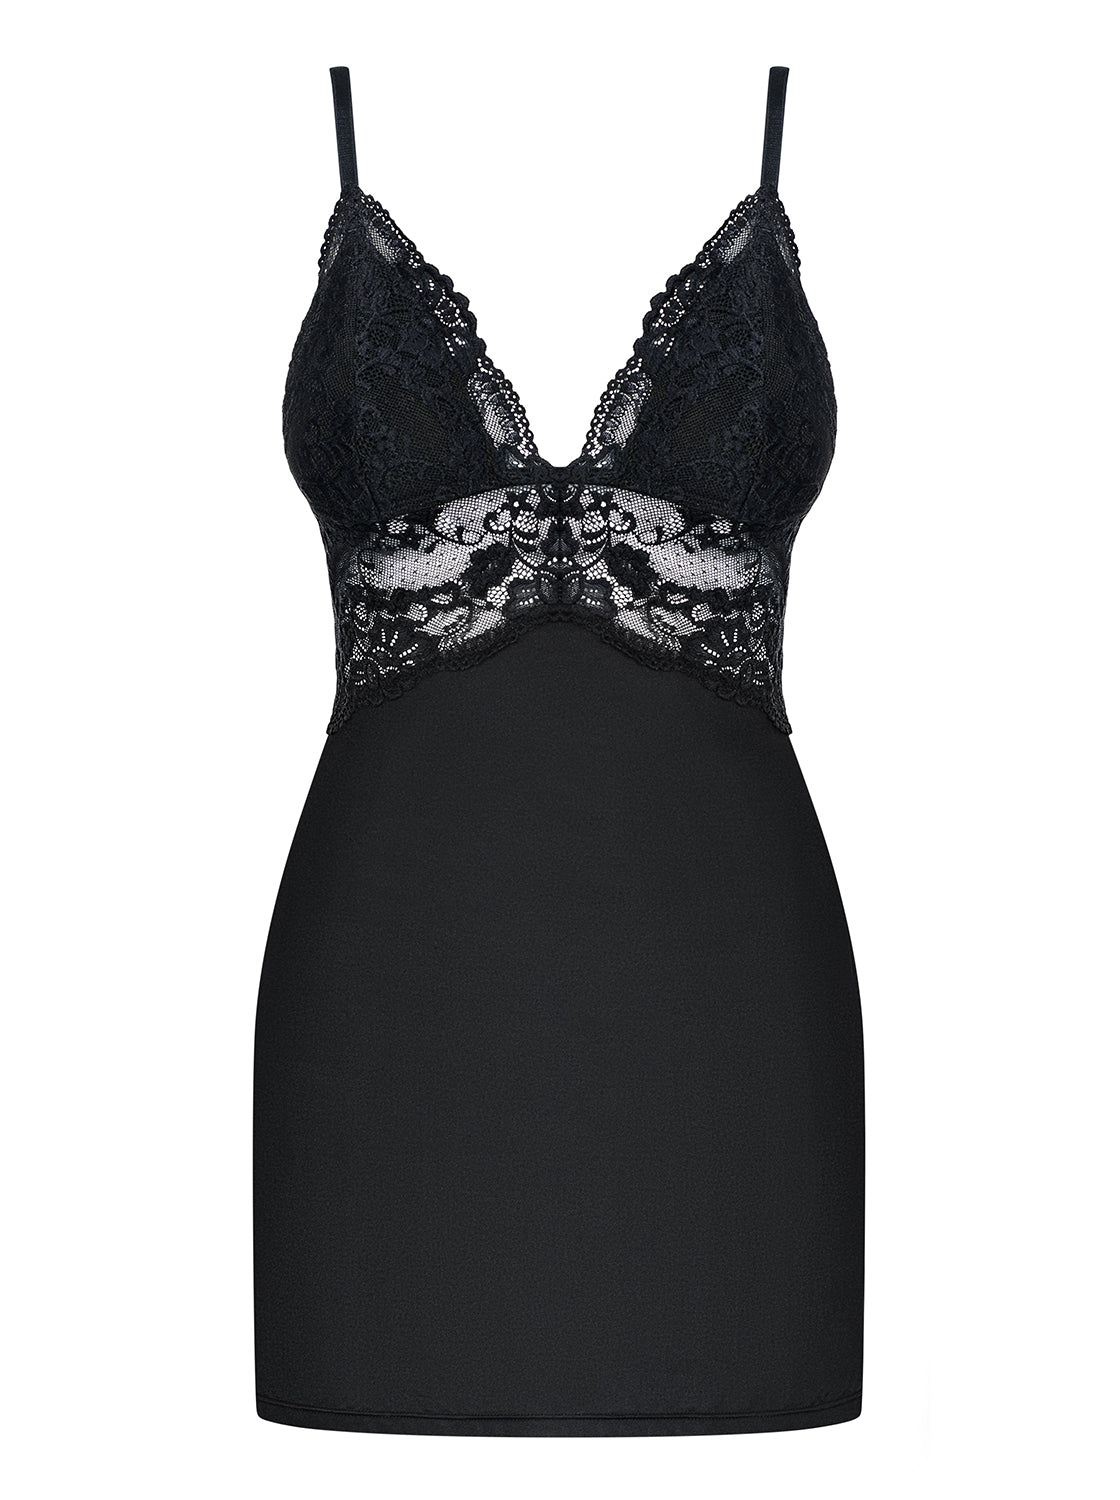 Enticing Lace Black Chemise and Thong Set